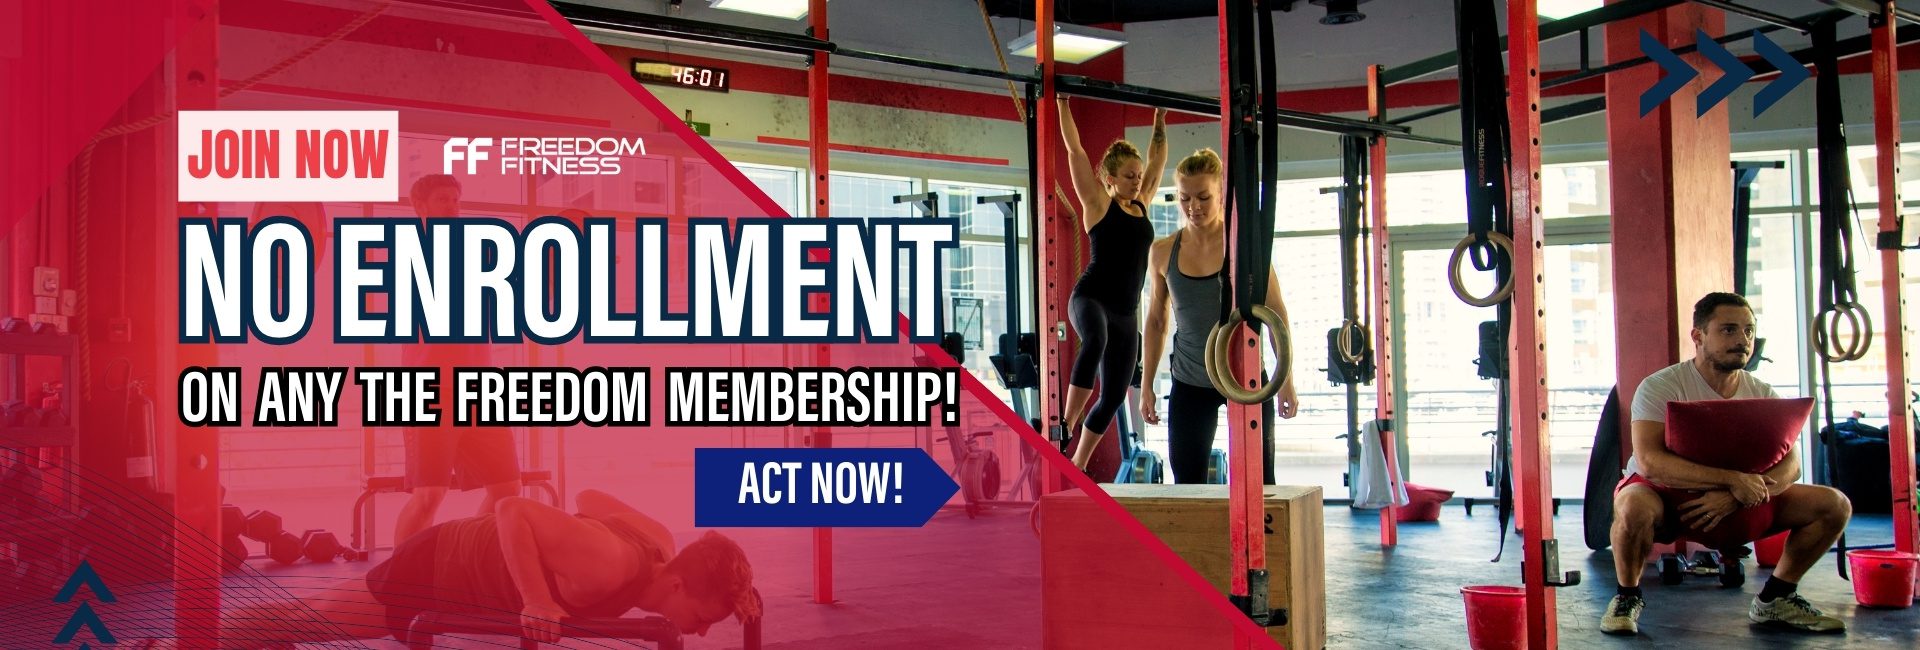 april join with no enrollment on any membership freedom fitness